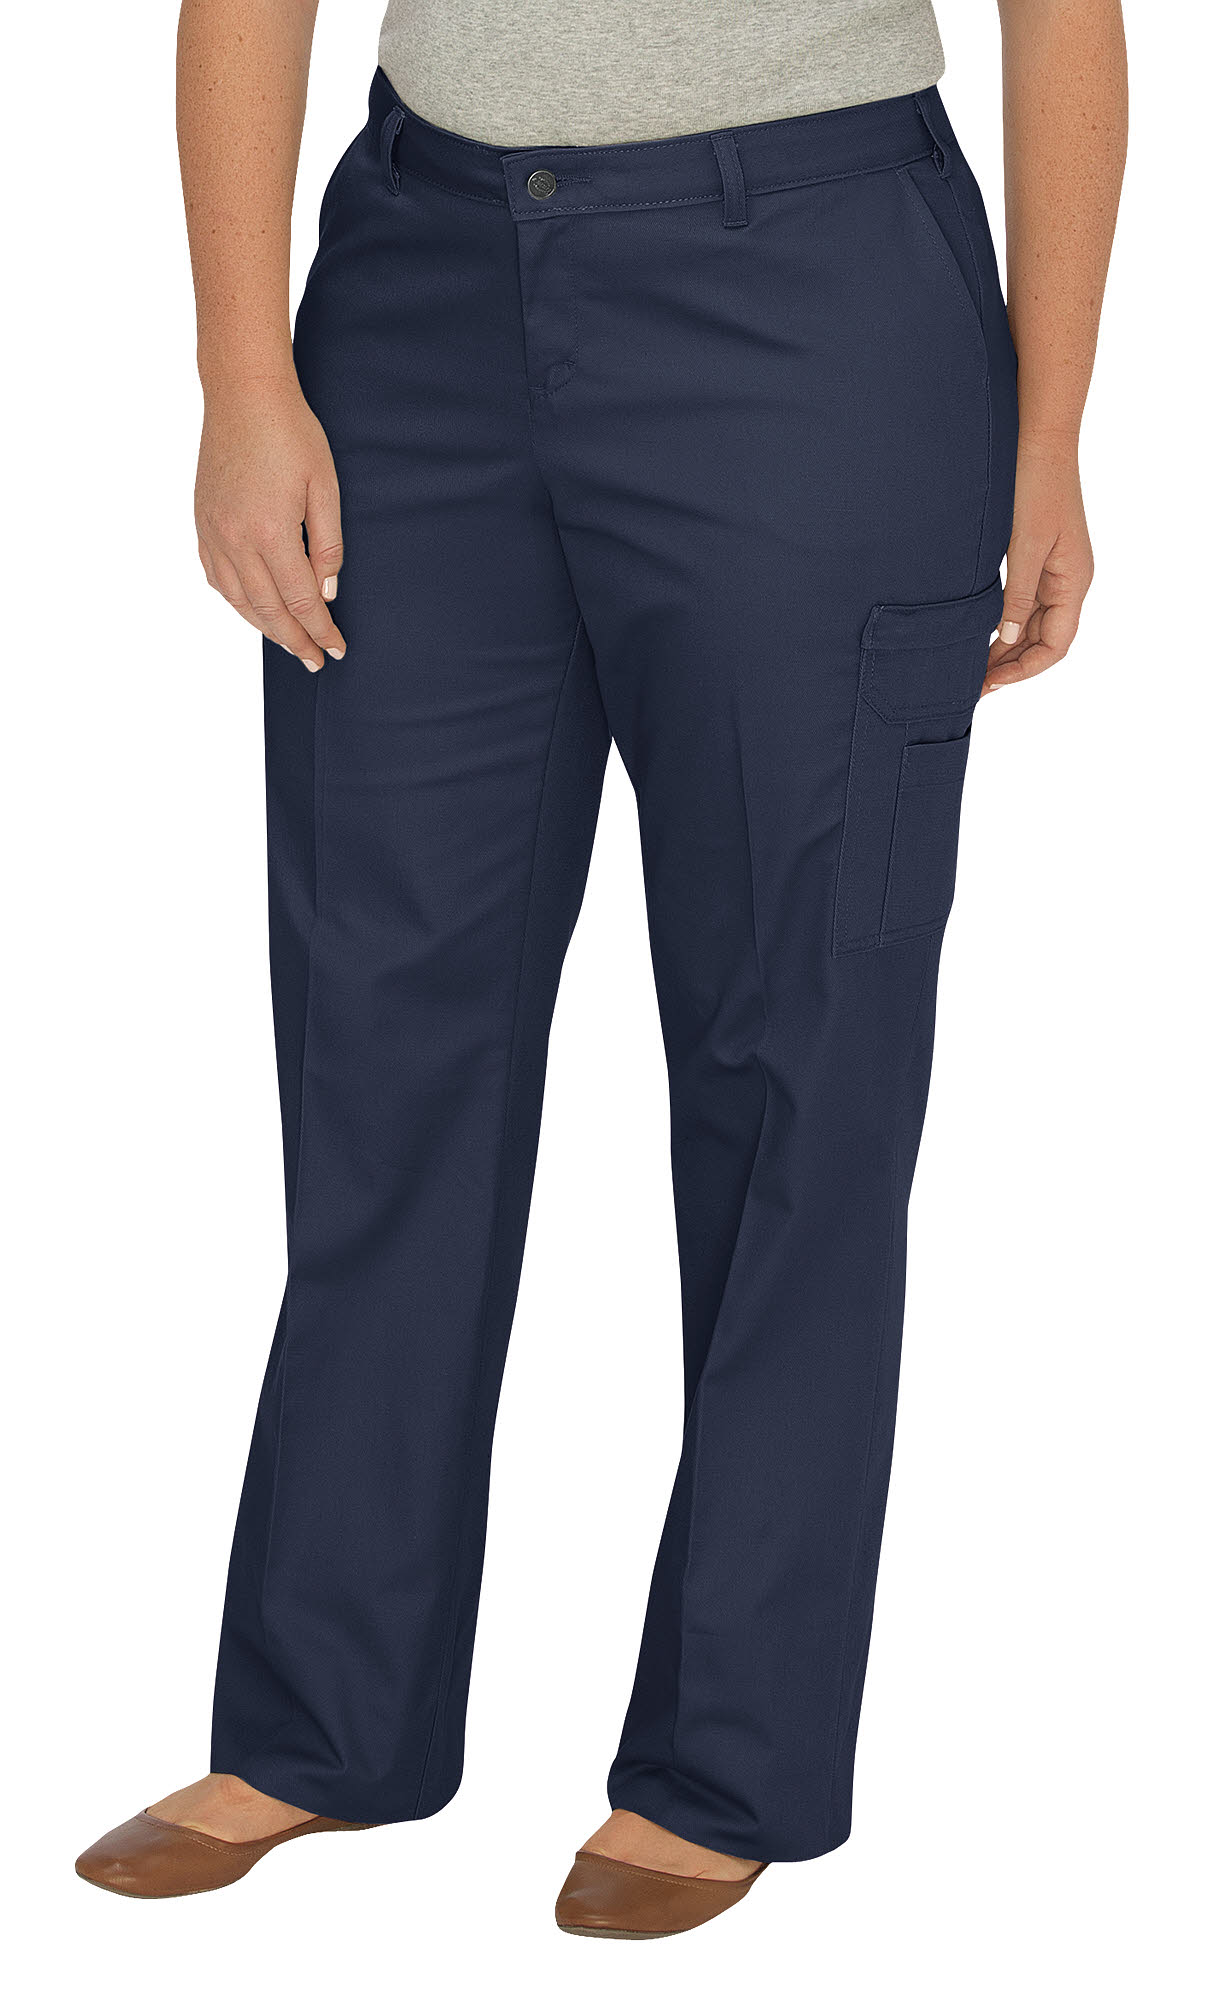 Women's Relaxed Fit Straight Leg Stretch Twill Pants (Plus